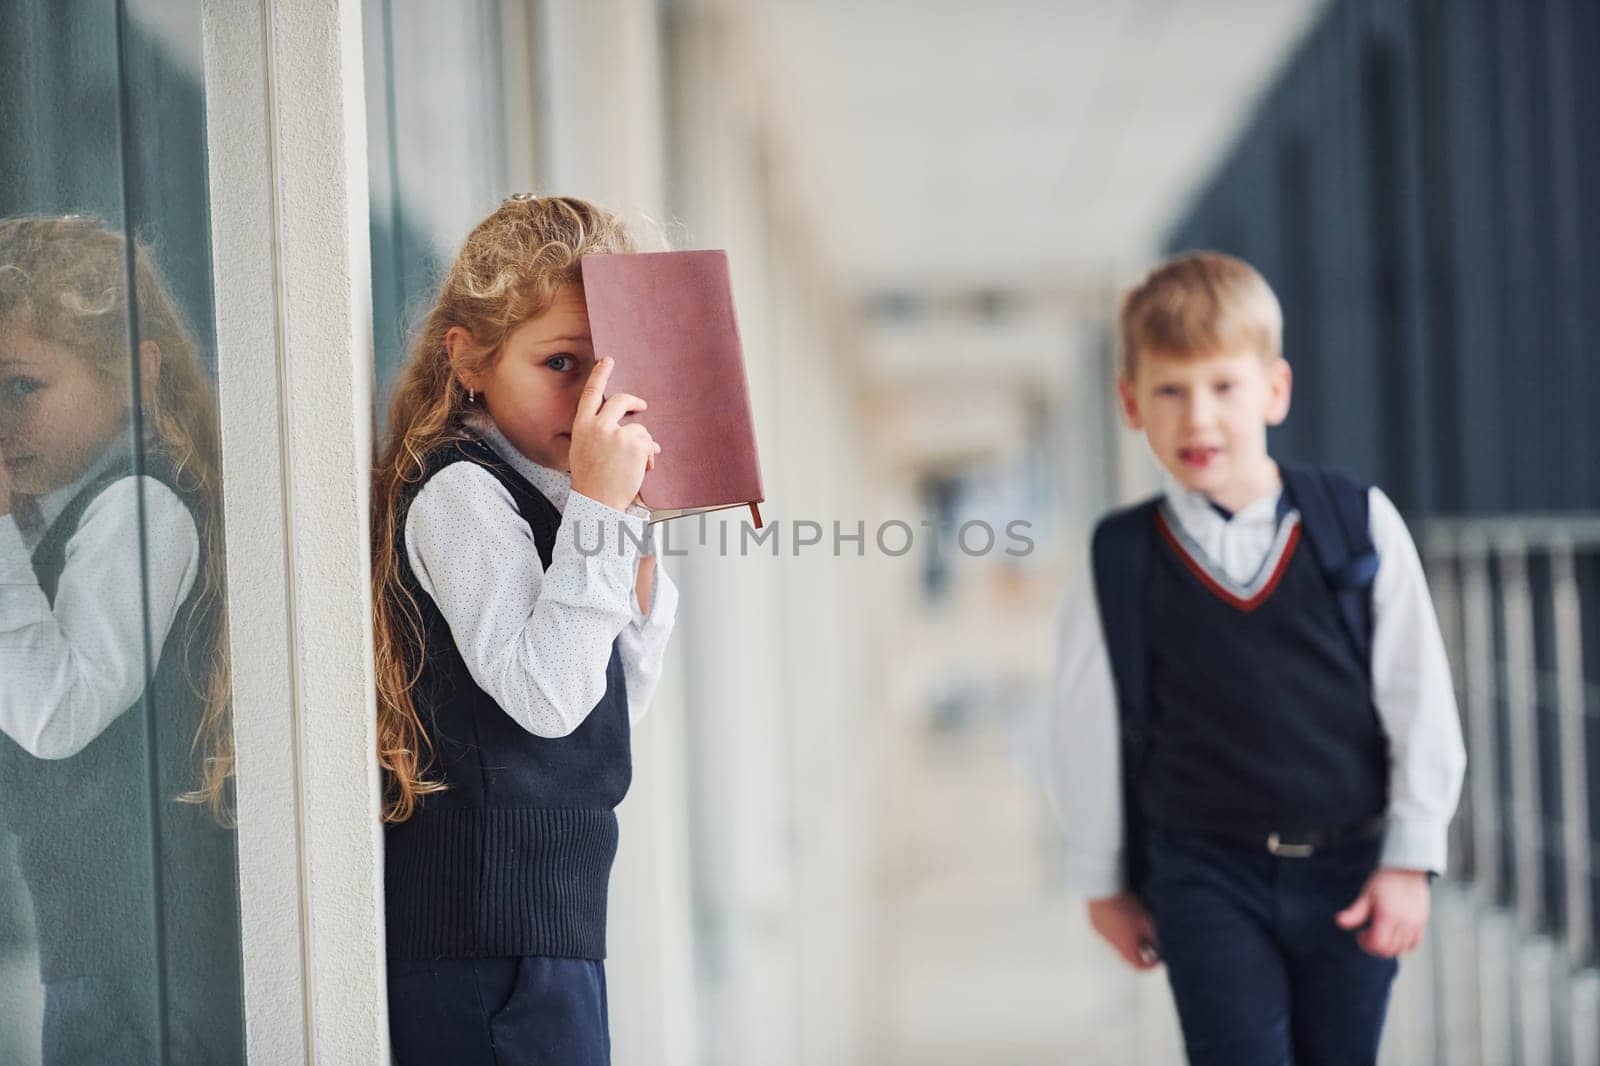 School kids in uniform with books together in corridor. Conception of education.